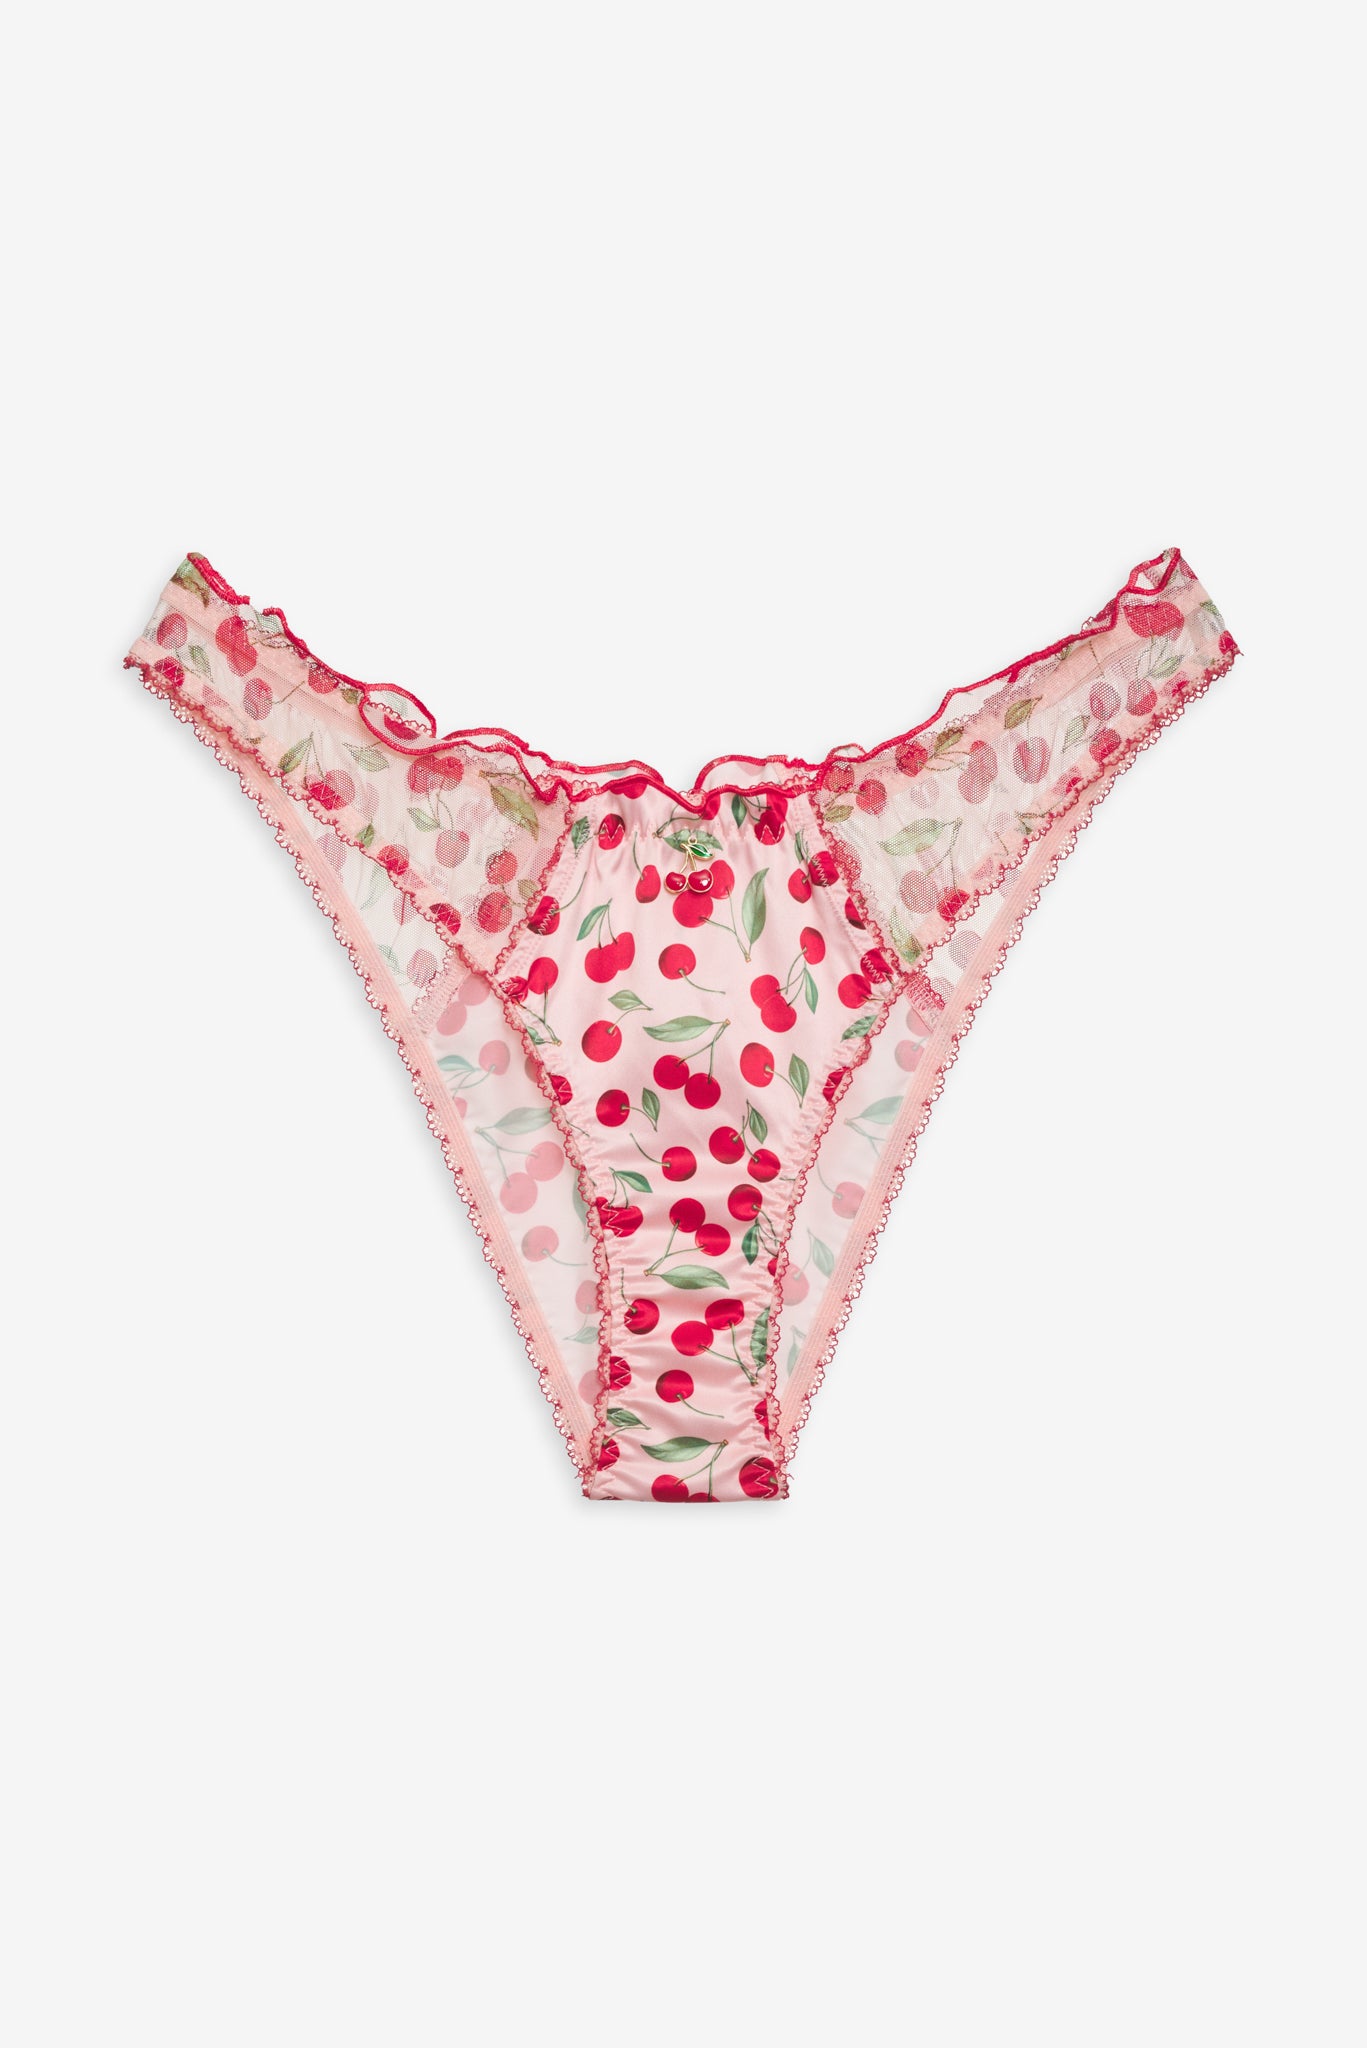 Buy Black/Pink Heart Print Thong Cotton and Lace Knickers 4 Pack from Next  Belgium